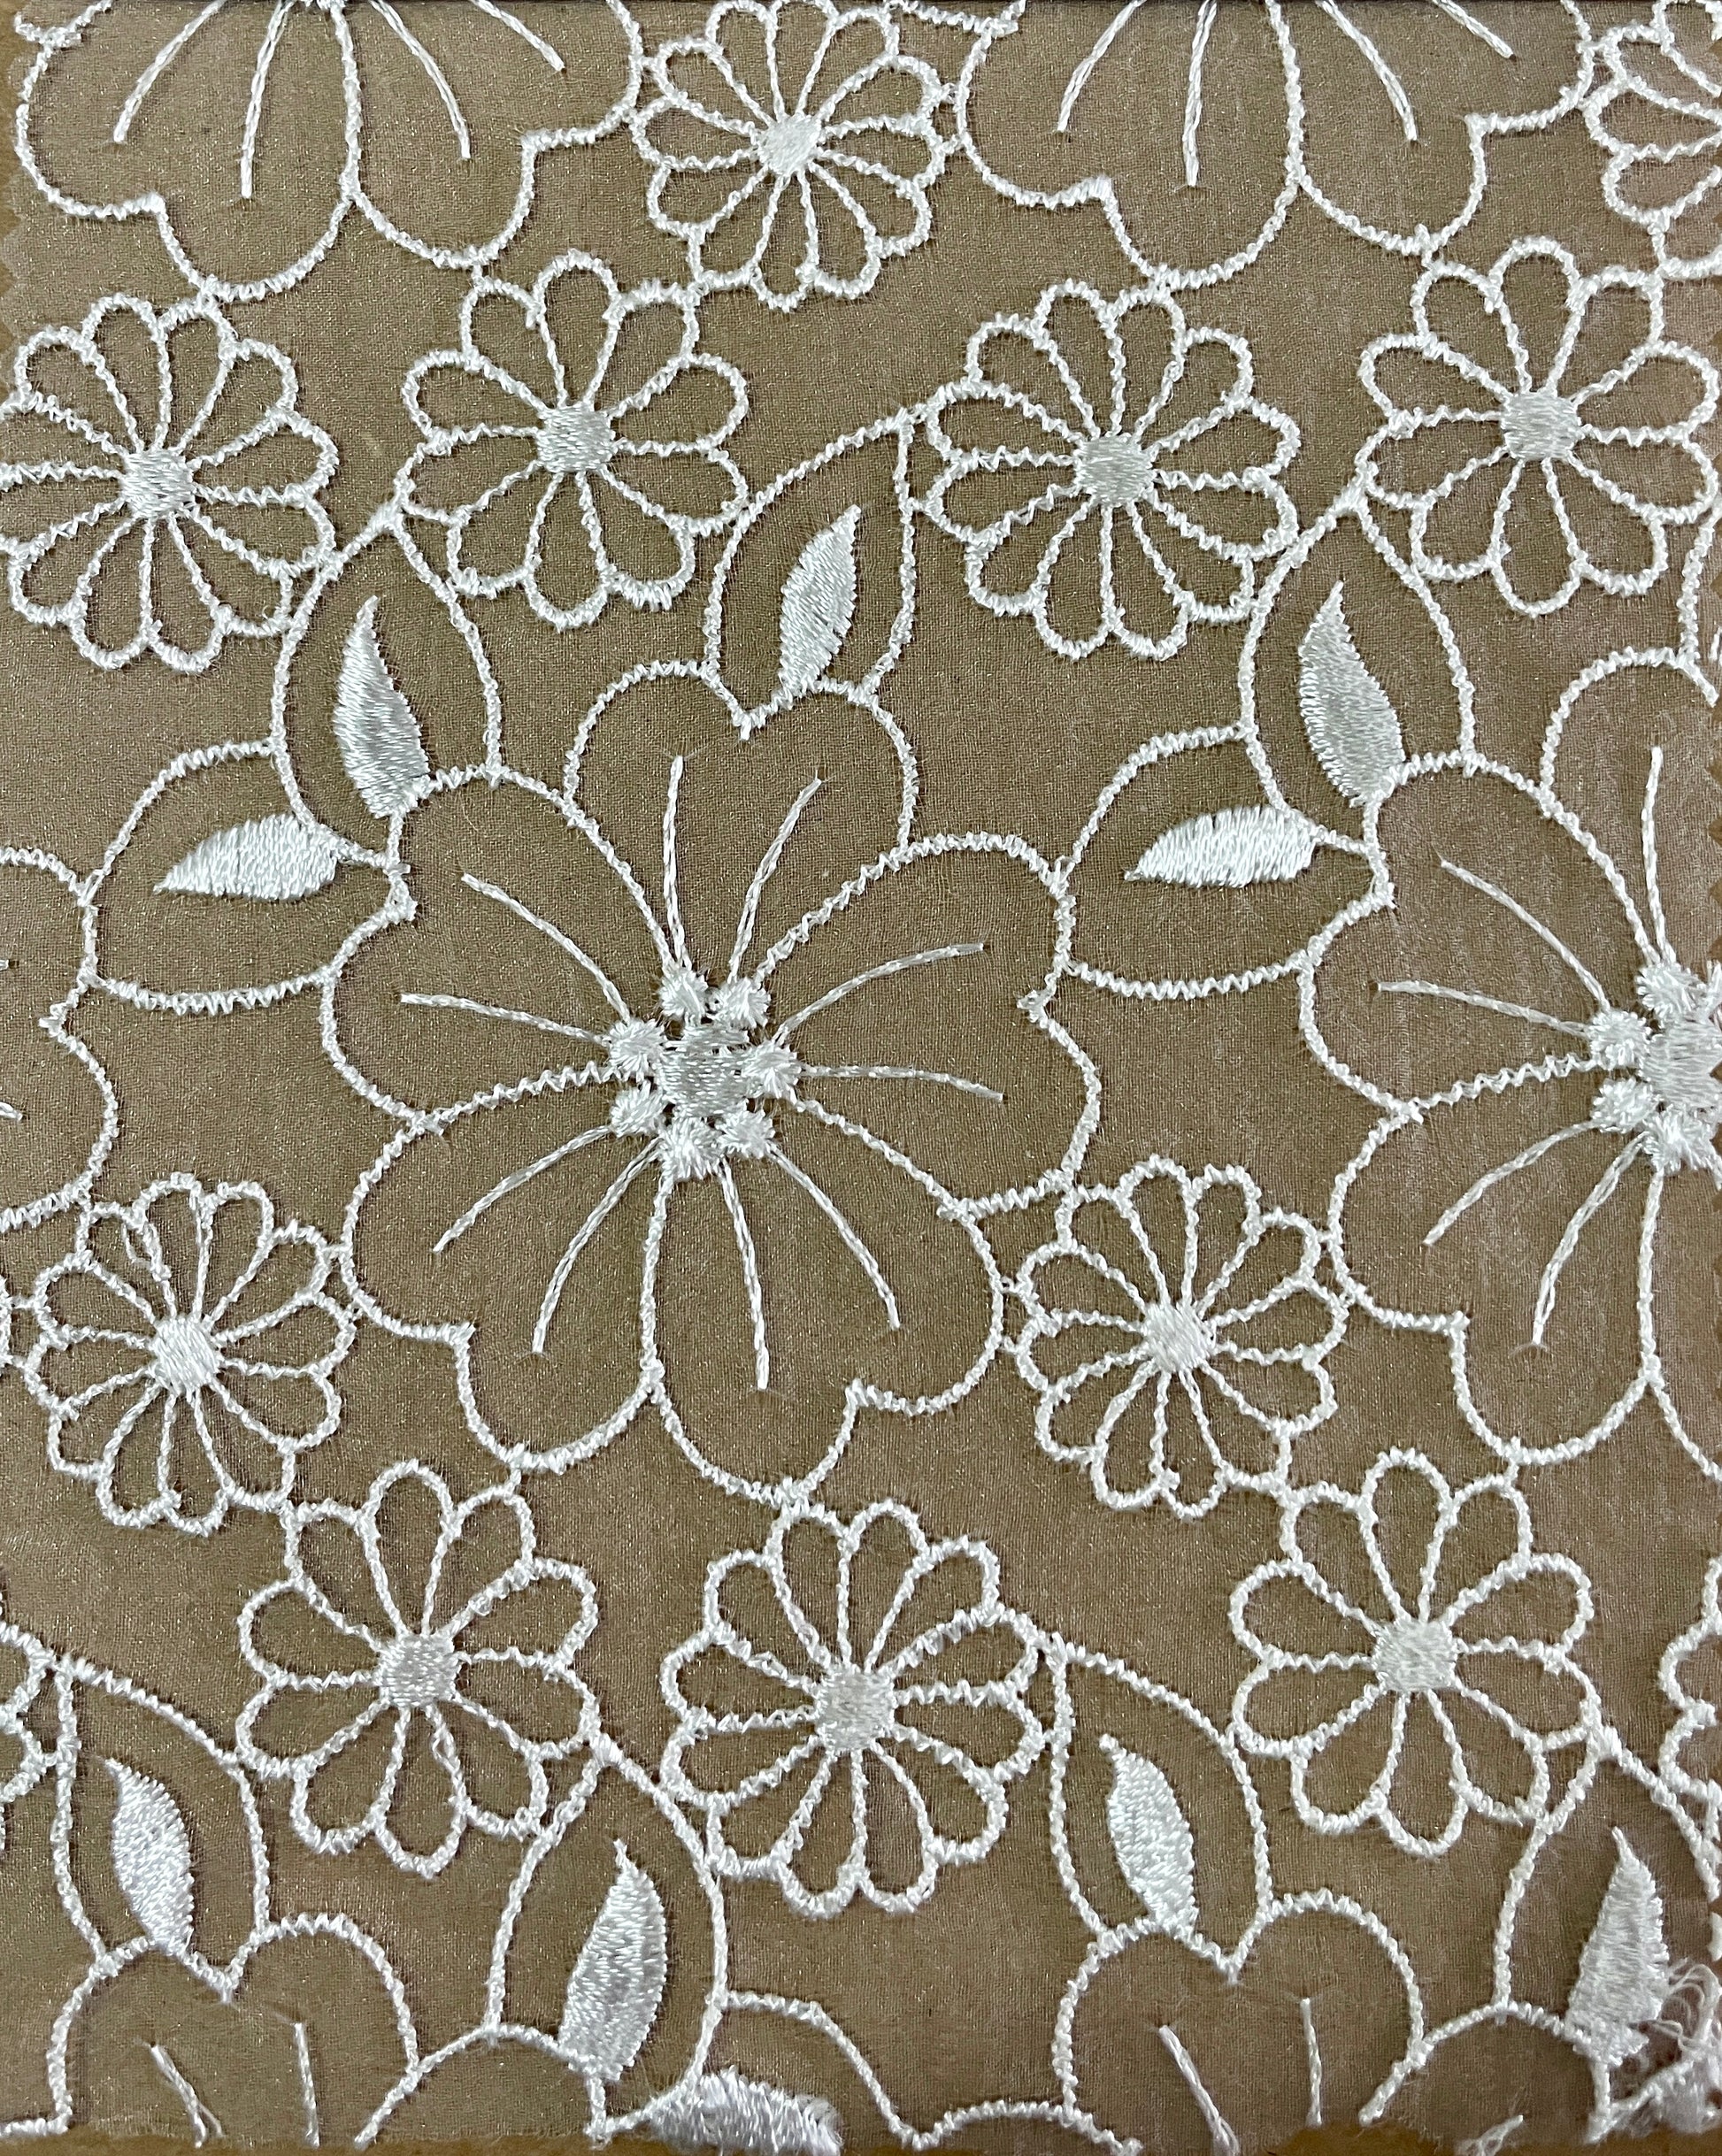 High quality Viscose Polyester Blended Woven  Embroidery Fabric - Natasha Fabric